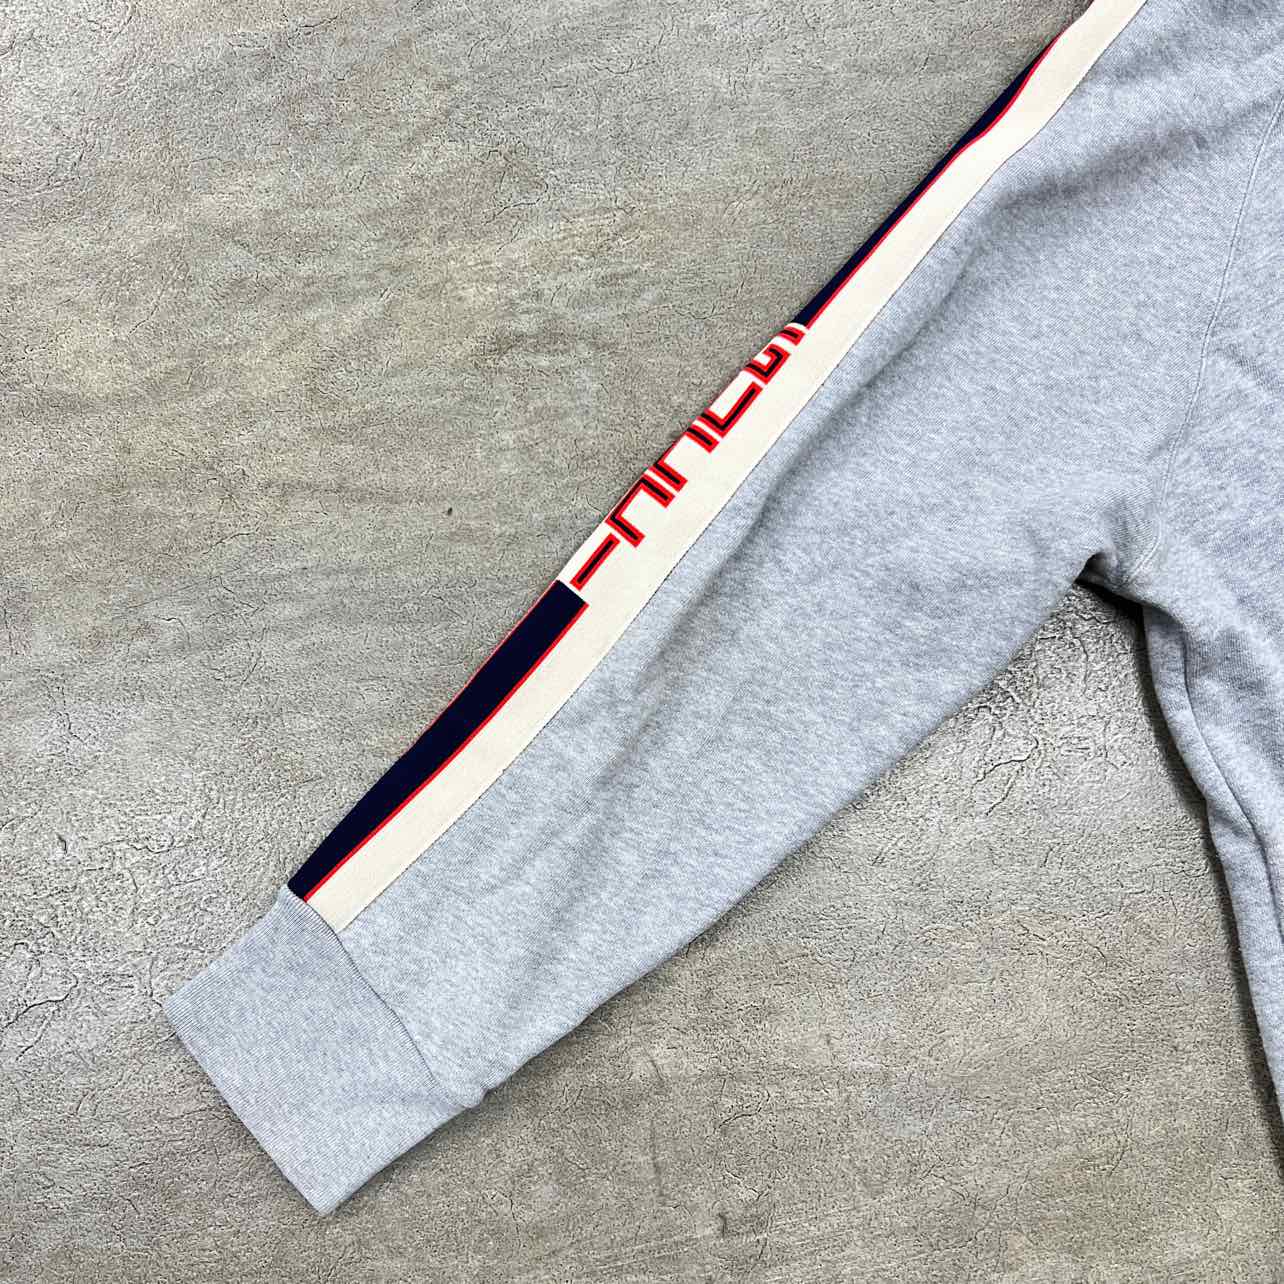 Gucci Hoodie &quot;STRIPED LOGO&quot; Grey Used Size L